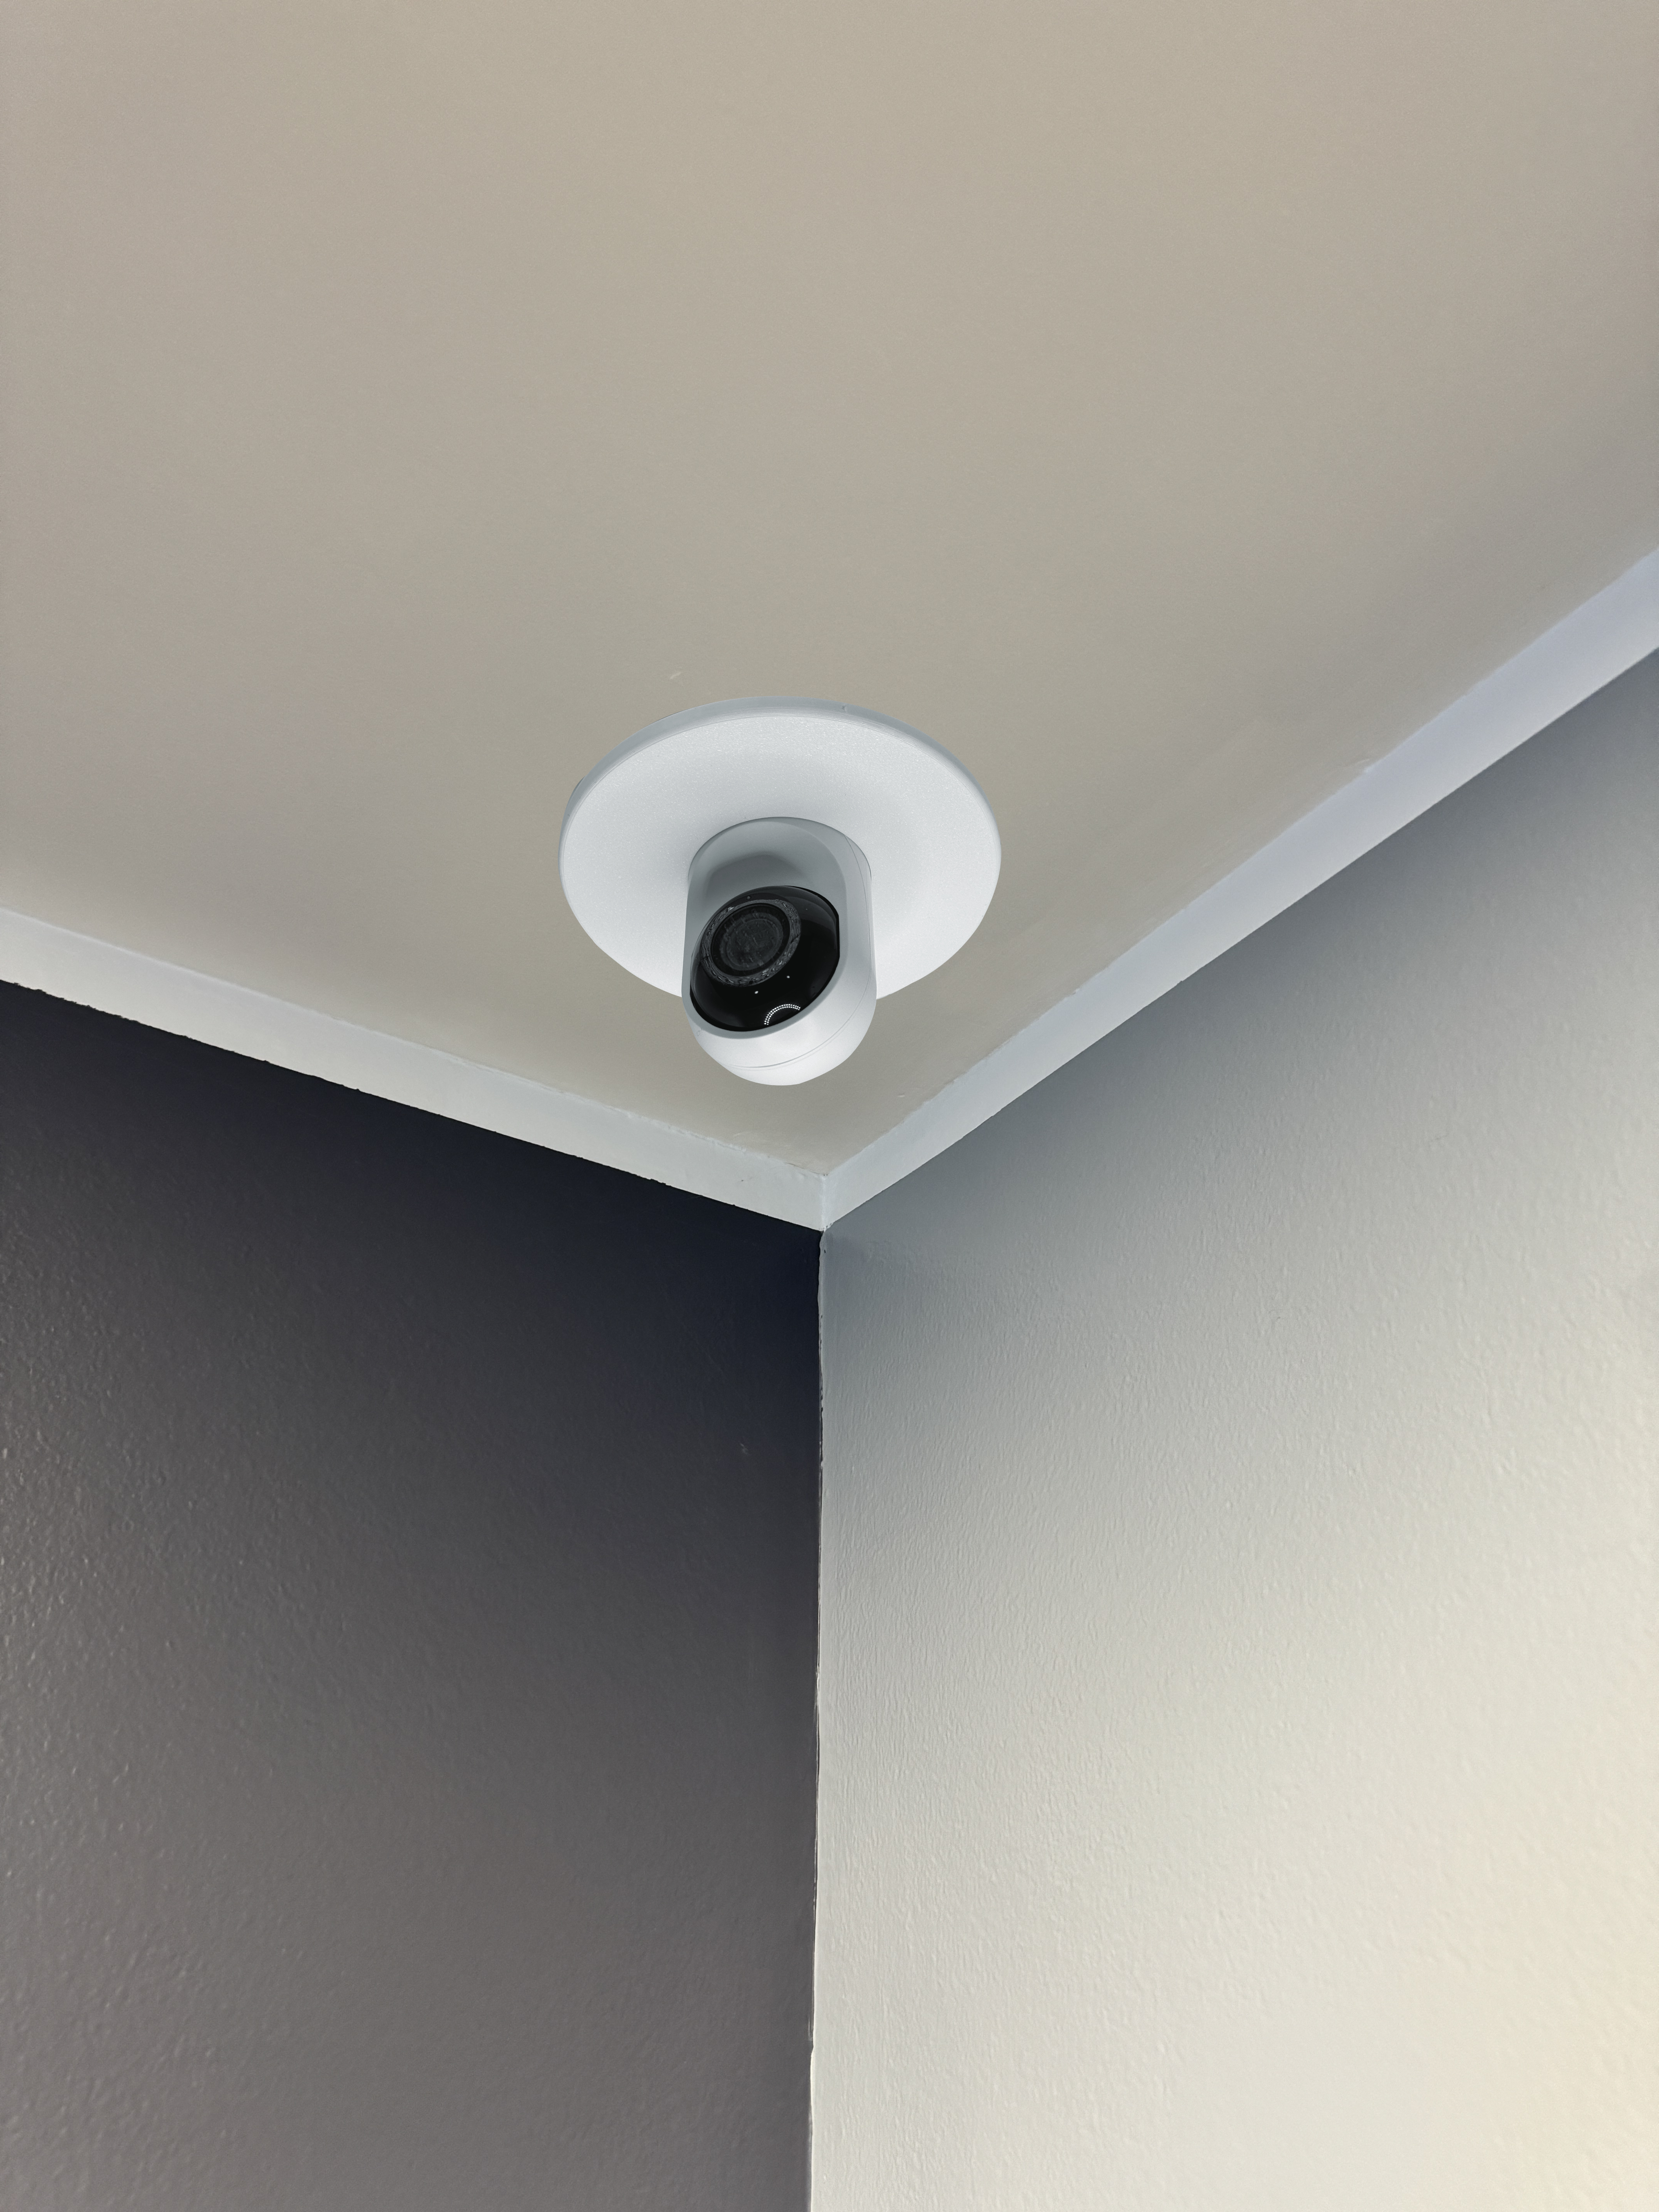 Camera Bracket mounted on a ceiling